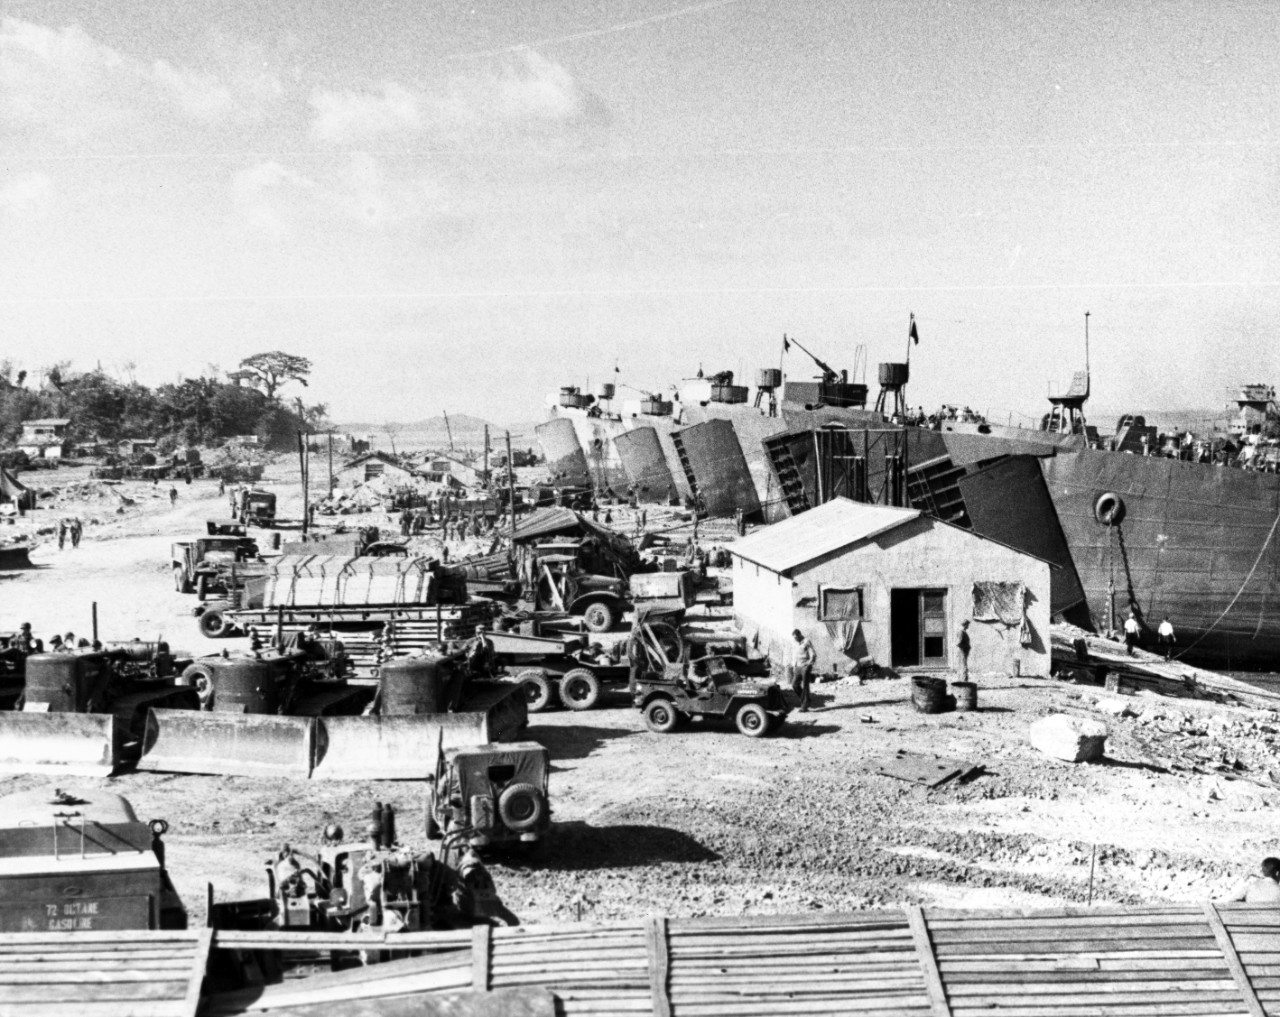 LSTs loading First Marine Division equipment at Inchon in preparation for the Wonsan operation, 13 October 1950.